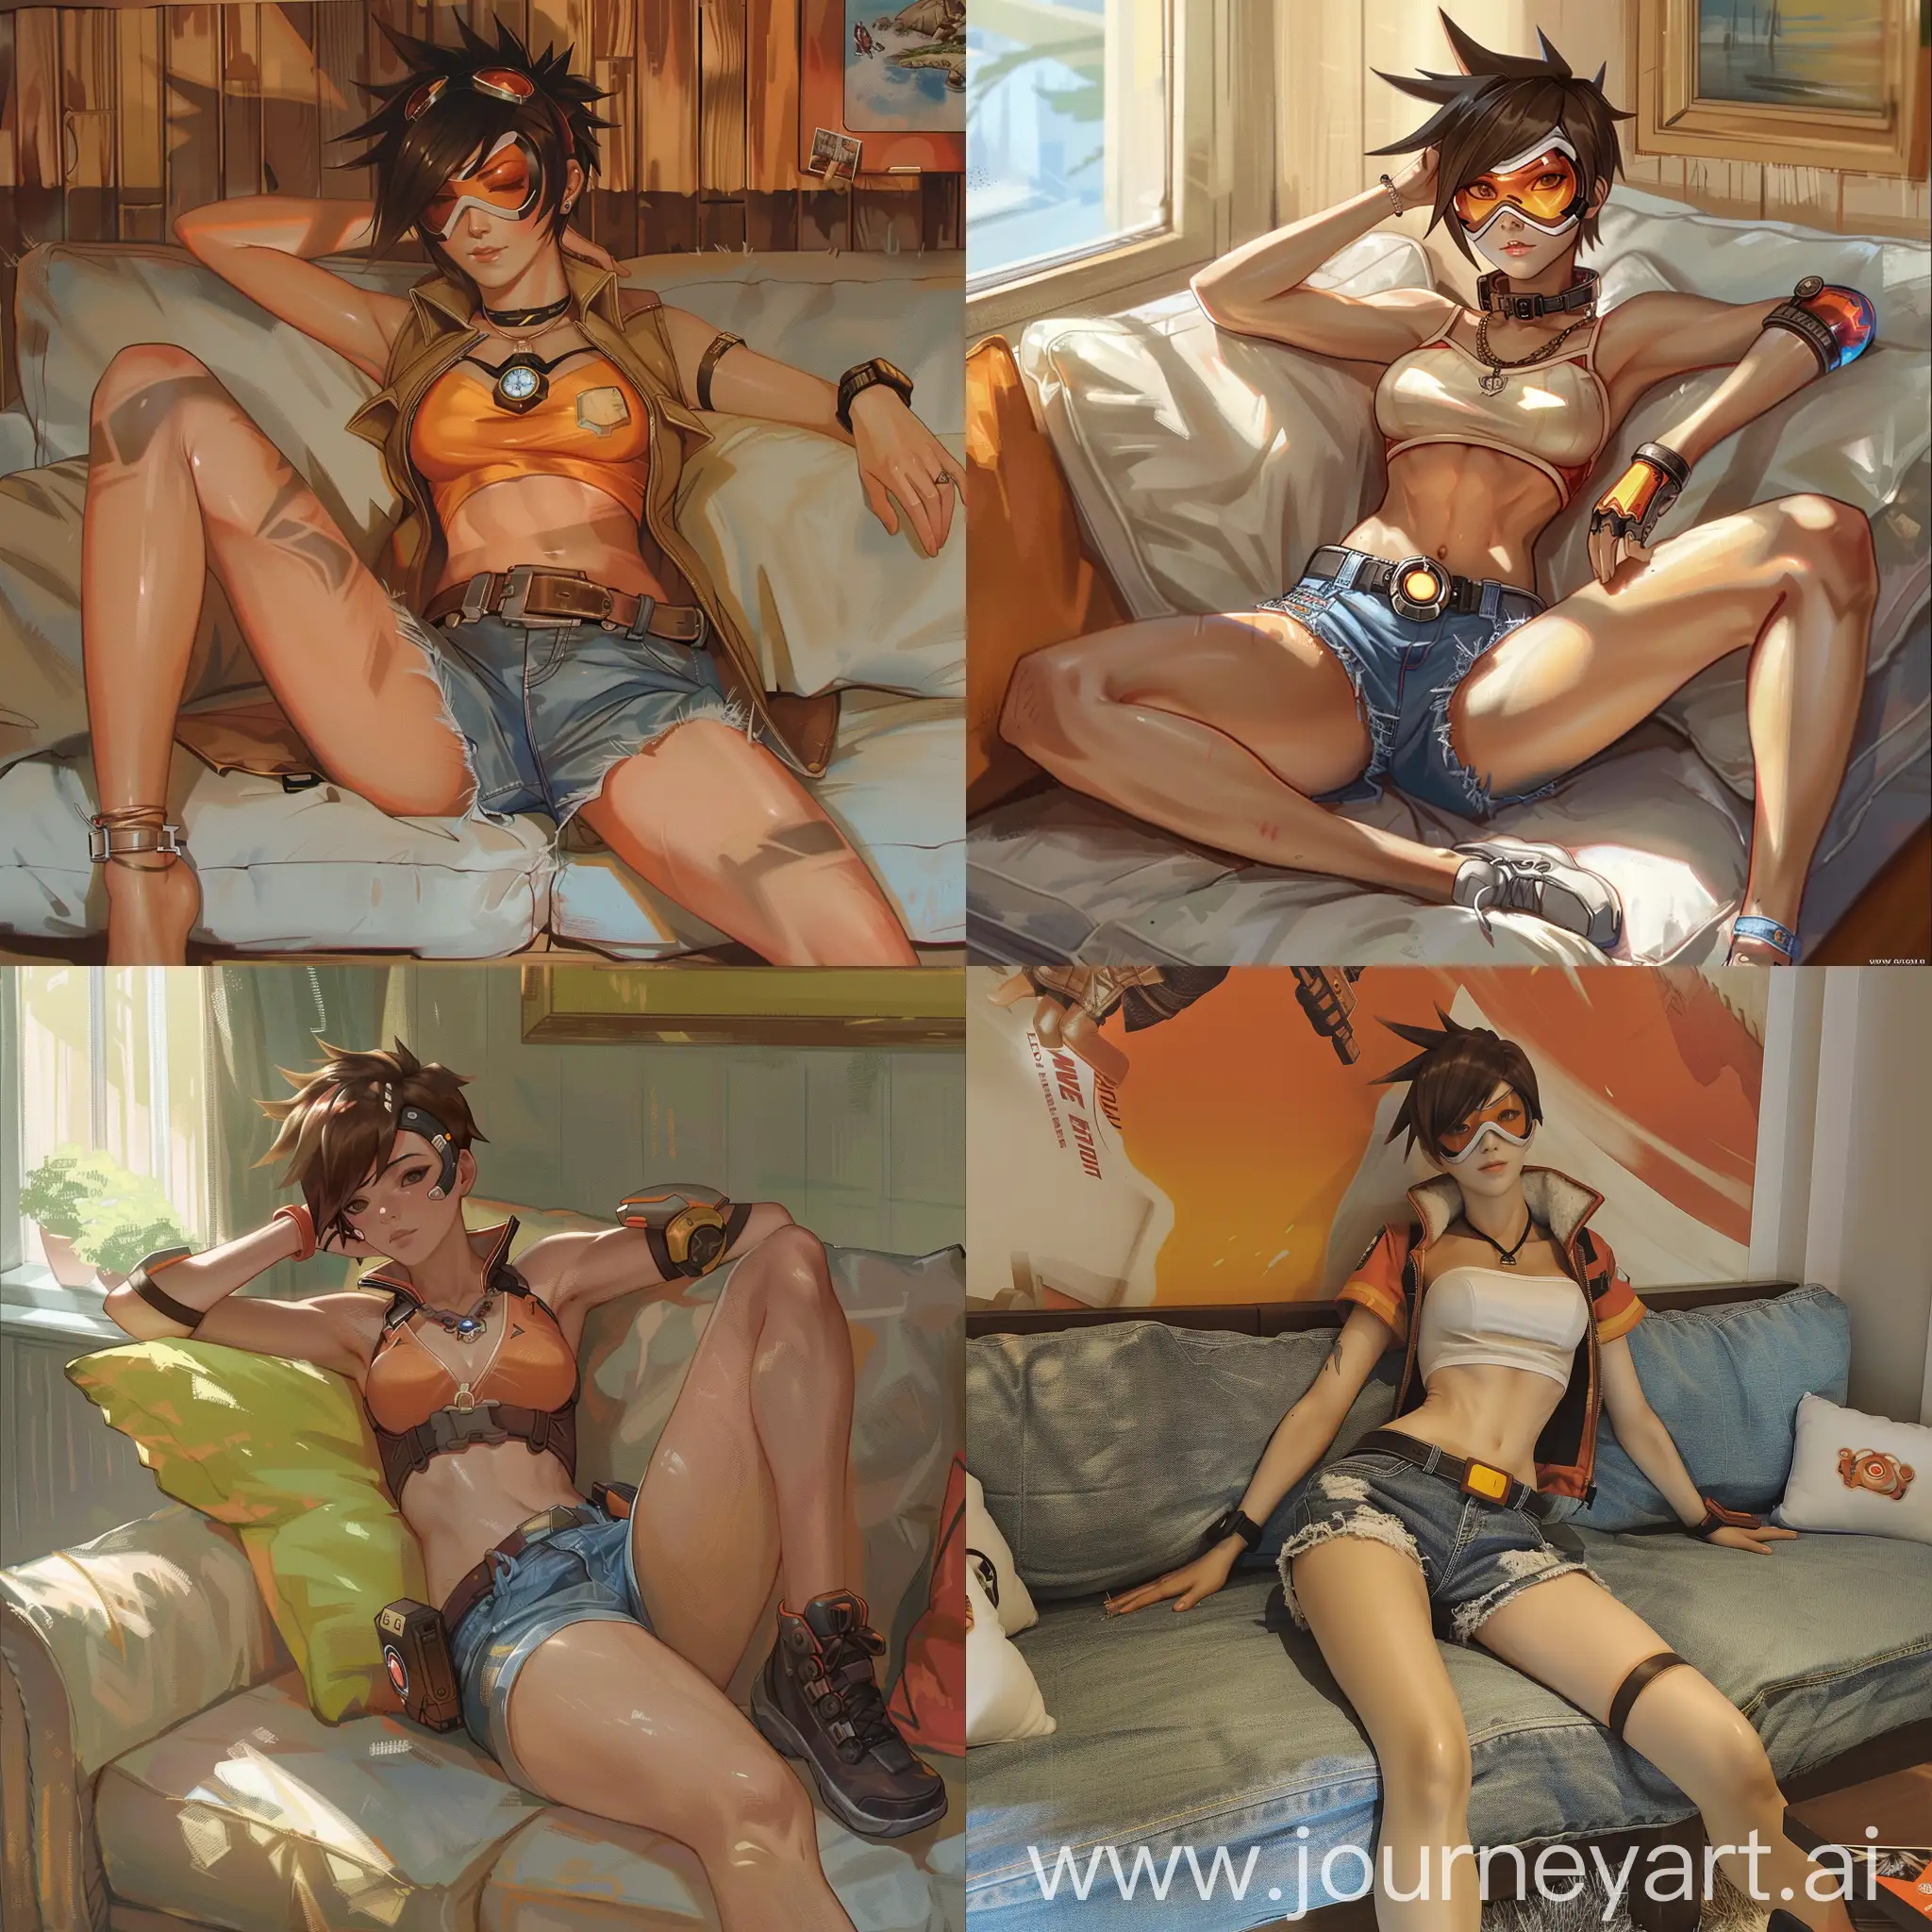 tracer from overwatch on a couch, jean shorts